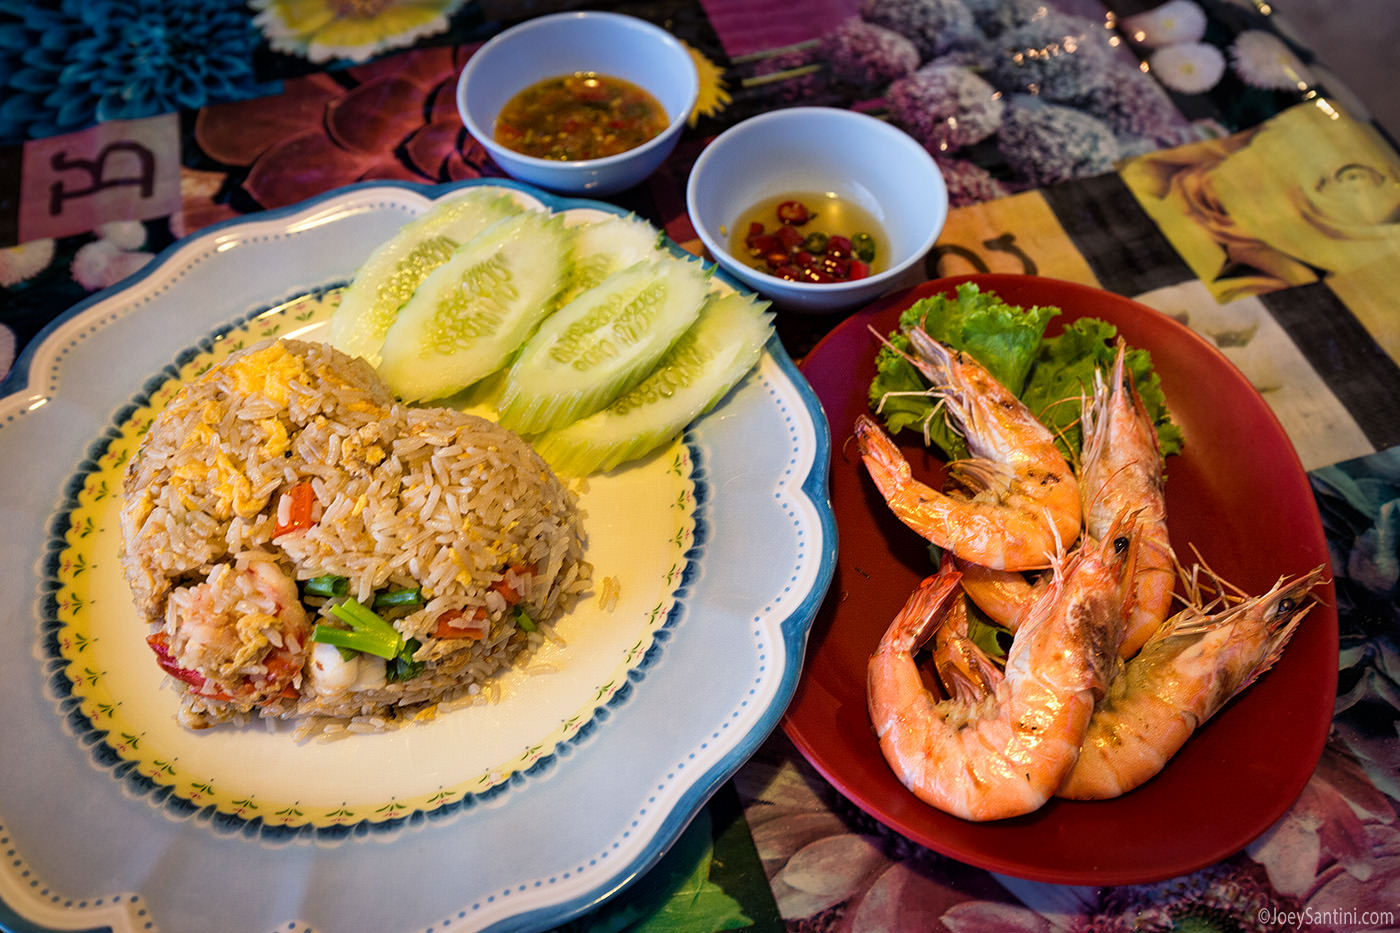 Fried rice and shrimps on dishes